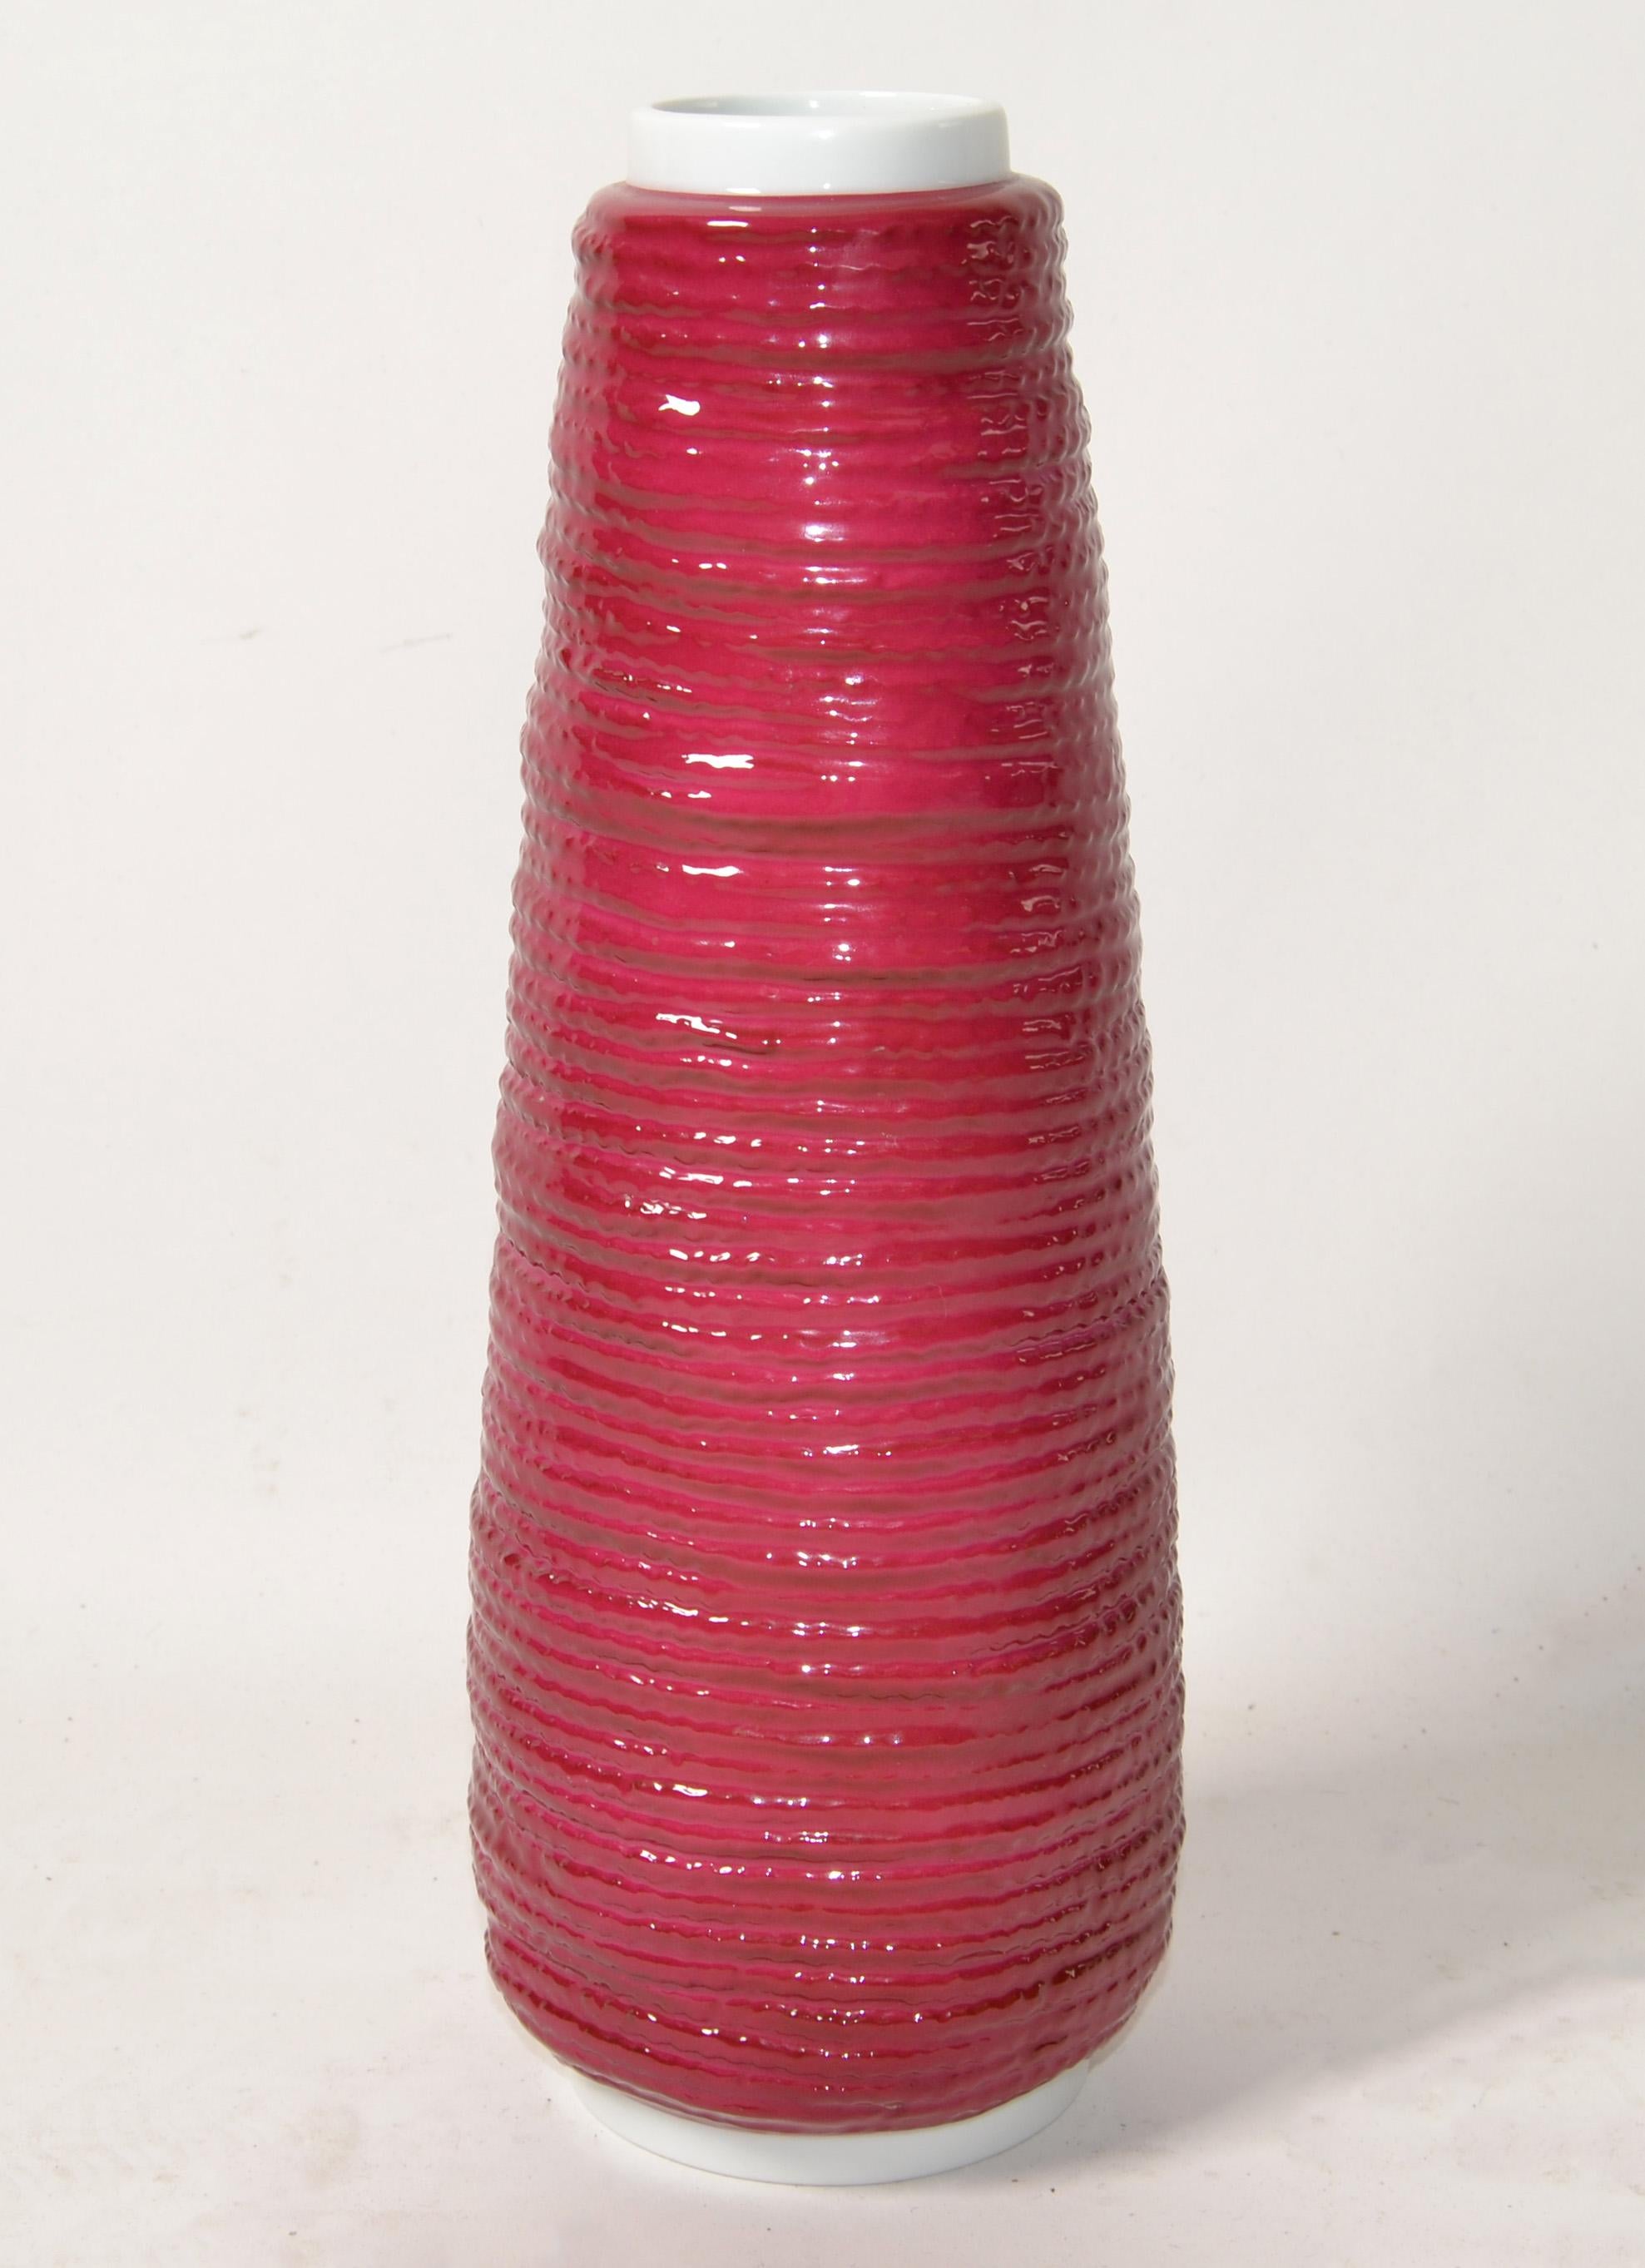 Coastal Italian Richard Ginori Porcelain Vase with Pink lacquered Rope, Cordonetto Missoni Home Edition.
Marked at the base and numbered 1735.
Italian Mediterrane Home Decoration from the Mid-Century Modern Period.
